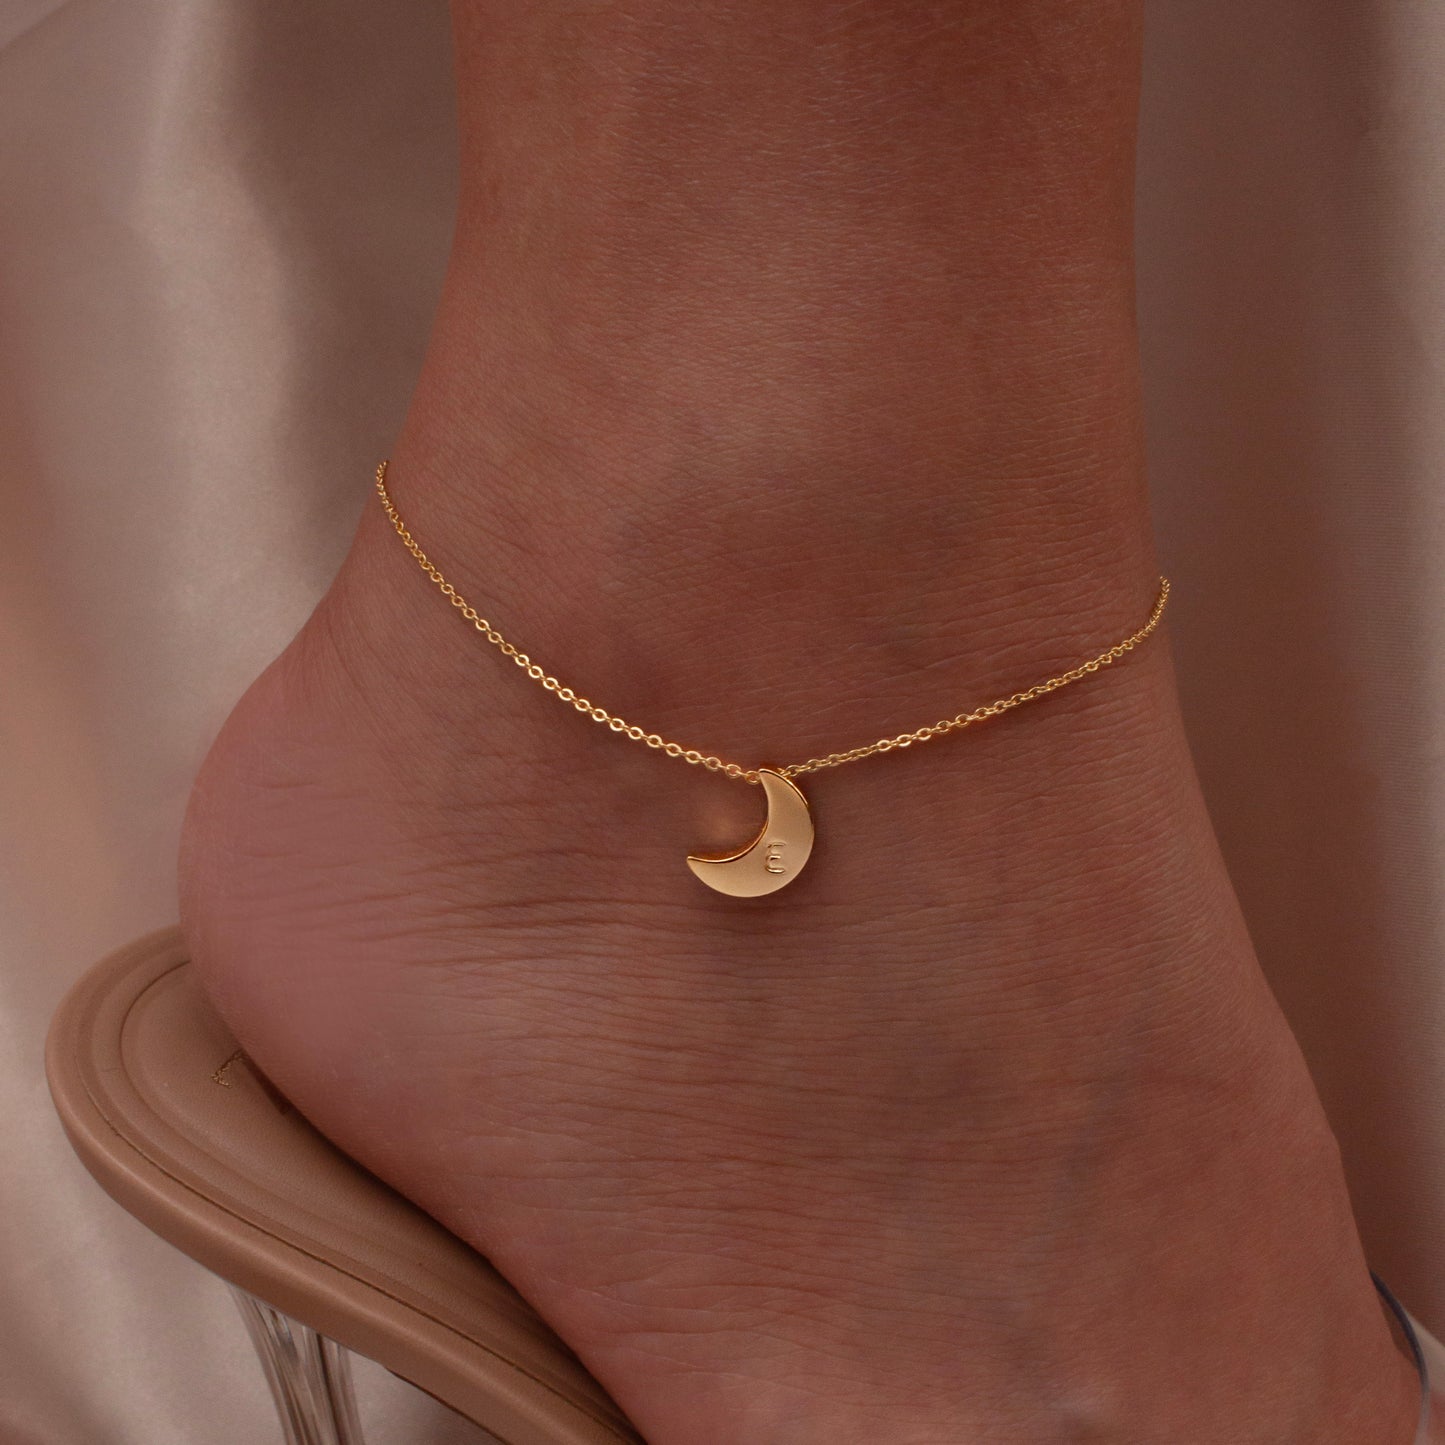 Moon initial anklet personalized Gifts For Her Moon Handmade ankle bracelet Dainty moon shape anklets